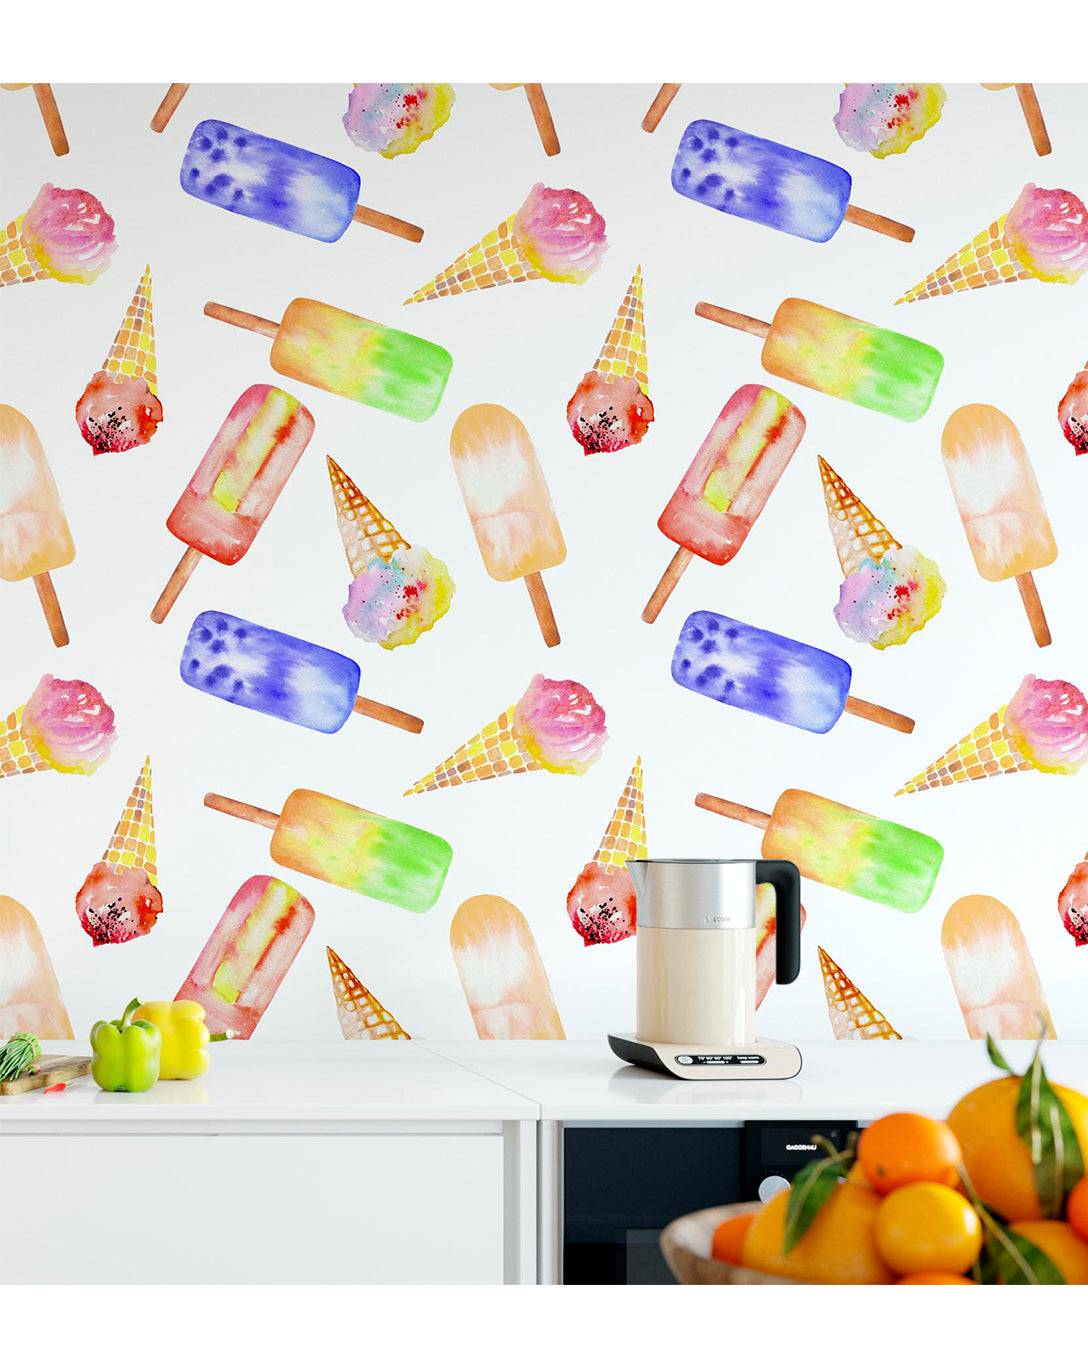 Removable Wallpaper Colorful Peel and Stick Wall Paper Ice Cream Juice Lolly Peelable Funny Decal Blue Yellow Red White Green Pink CC048